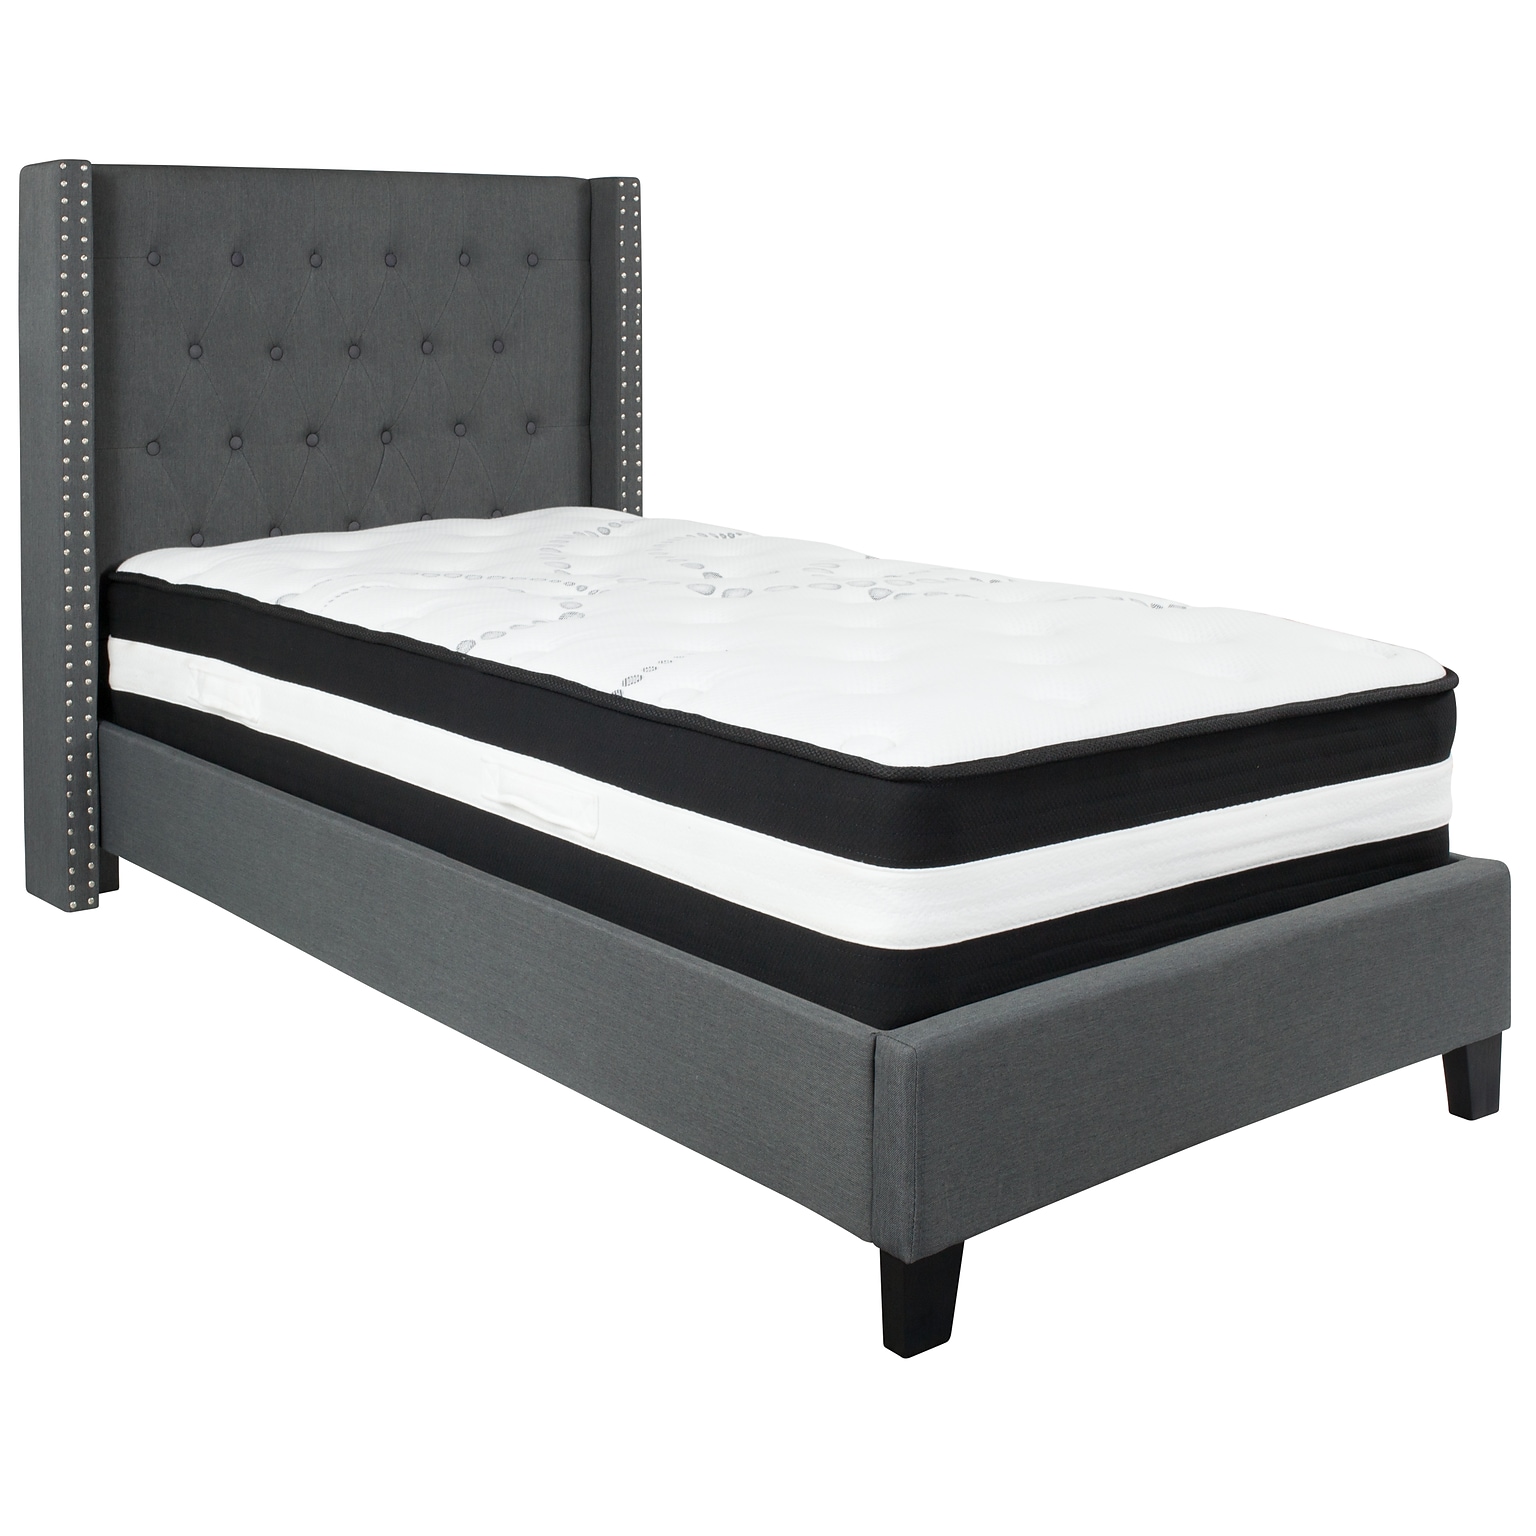 Flash Furniture Riverdale Tufted Upholstered Platform Bed in Dark Gray Fabric with Pocket Spring Mattress, Twin (HGBM45)